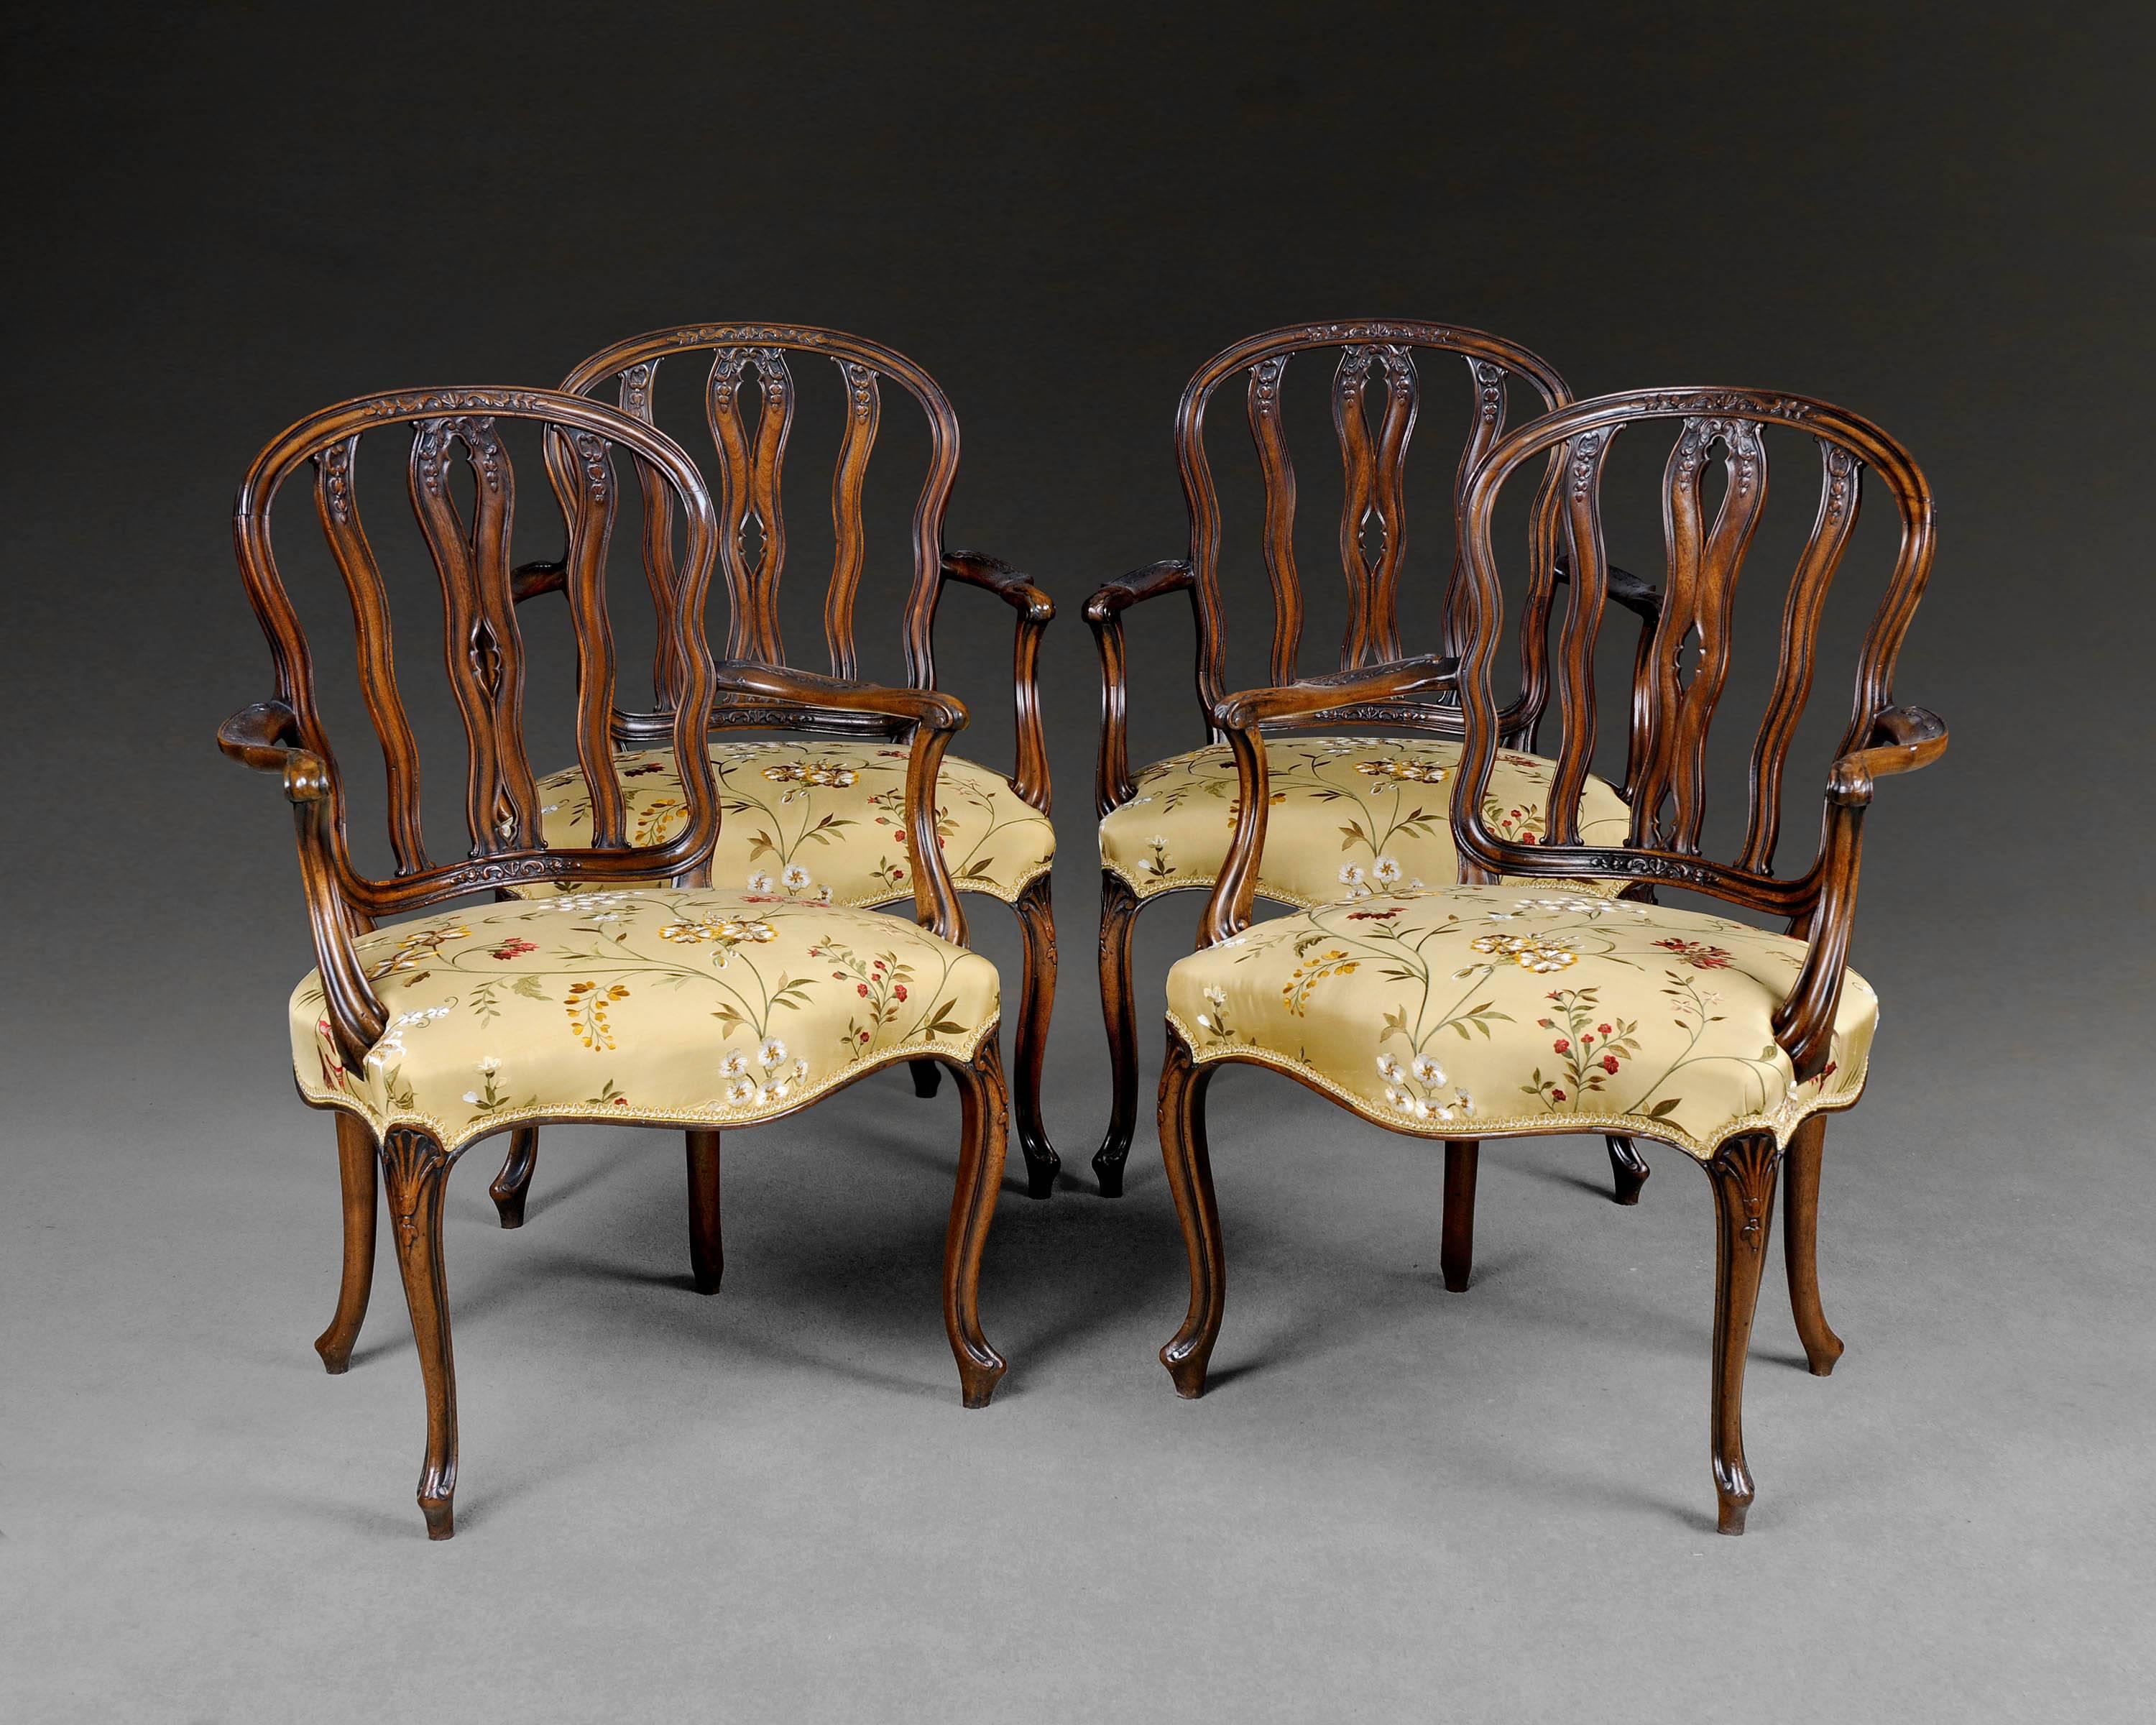 An important set of four Hepplewhite period mahogany salon armchairs. The cartouche shaped carved backs with wavy carved uprights flanked by carved shaped scrolling arms and raised on extremely fine carved cabriole legs.

One from this set of